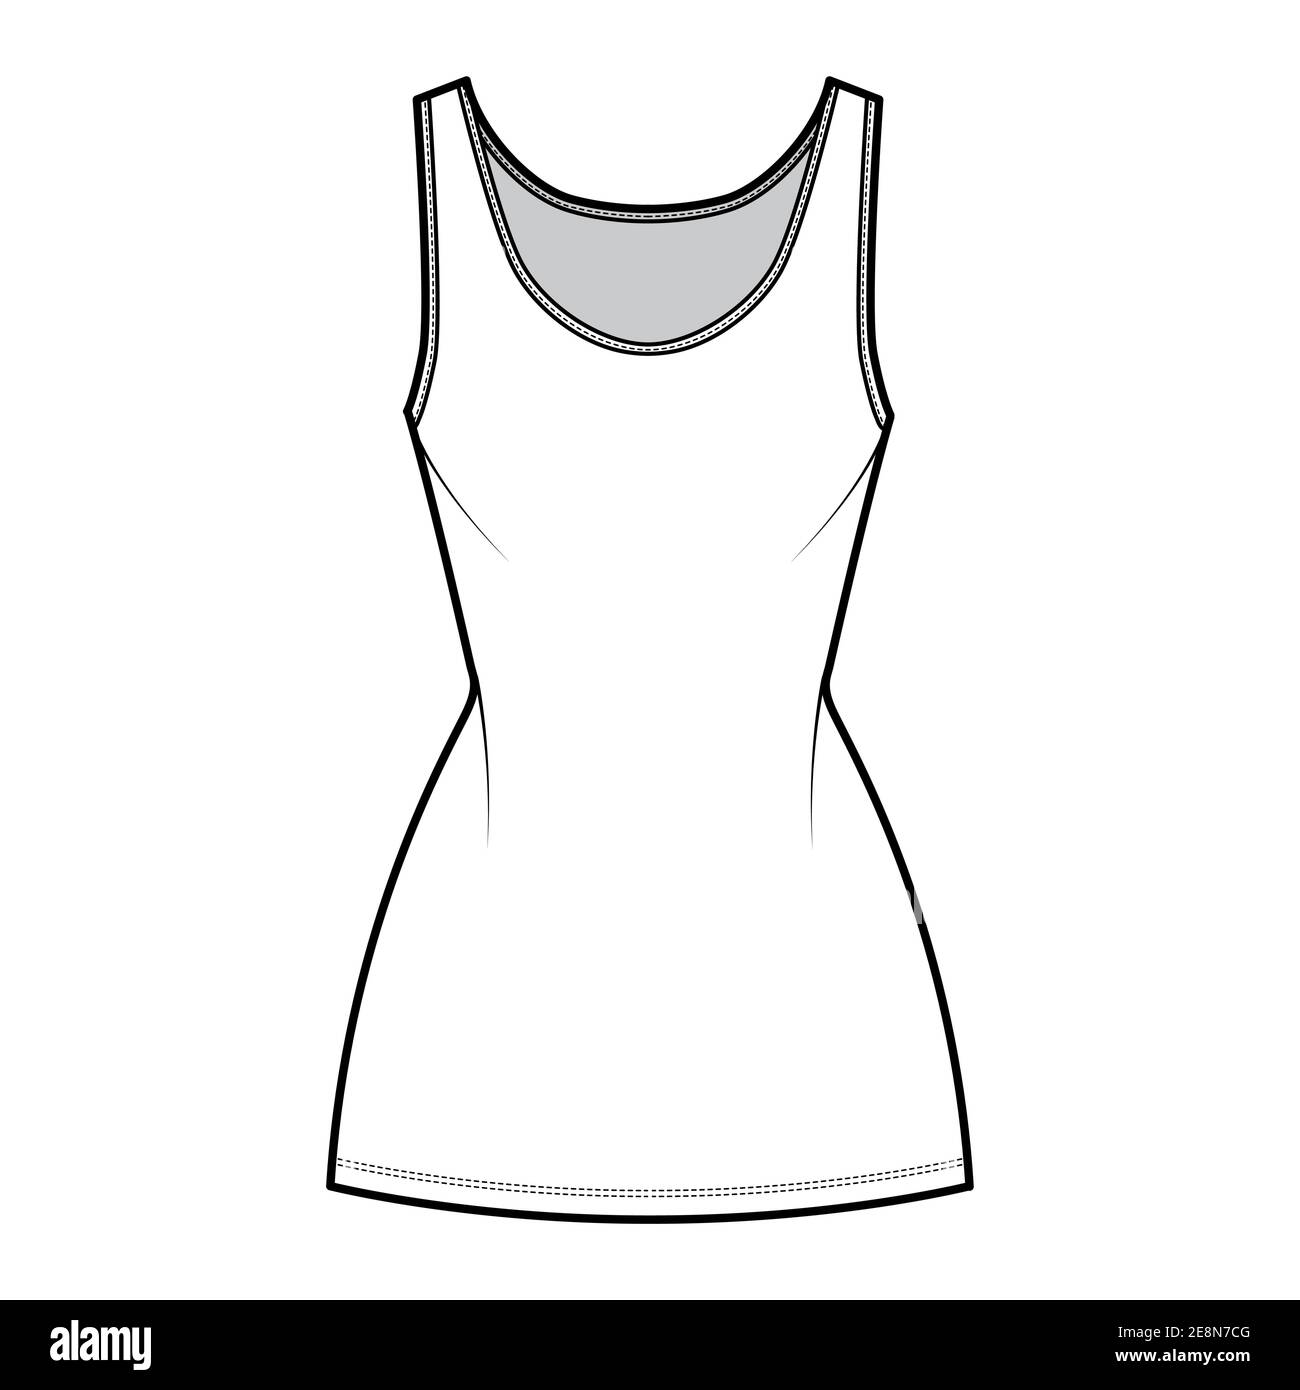 Tank dress technical fashion illustration with scoop neck, straps